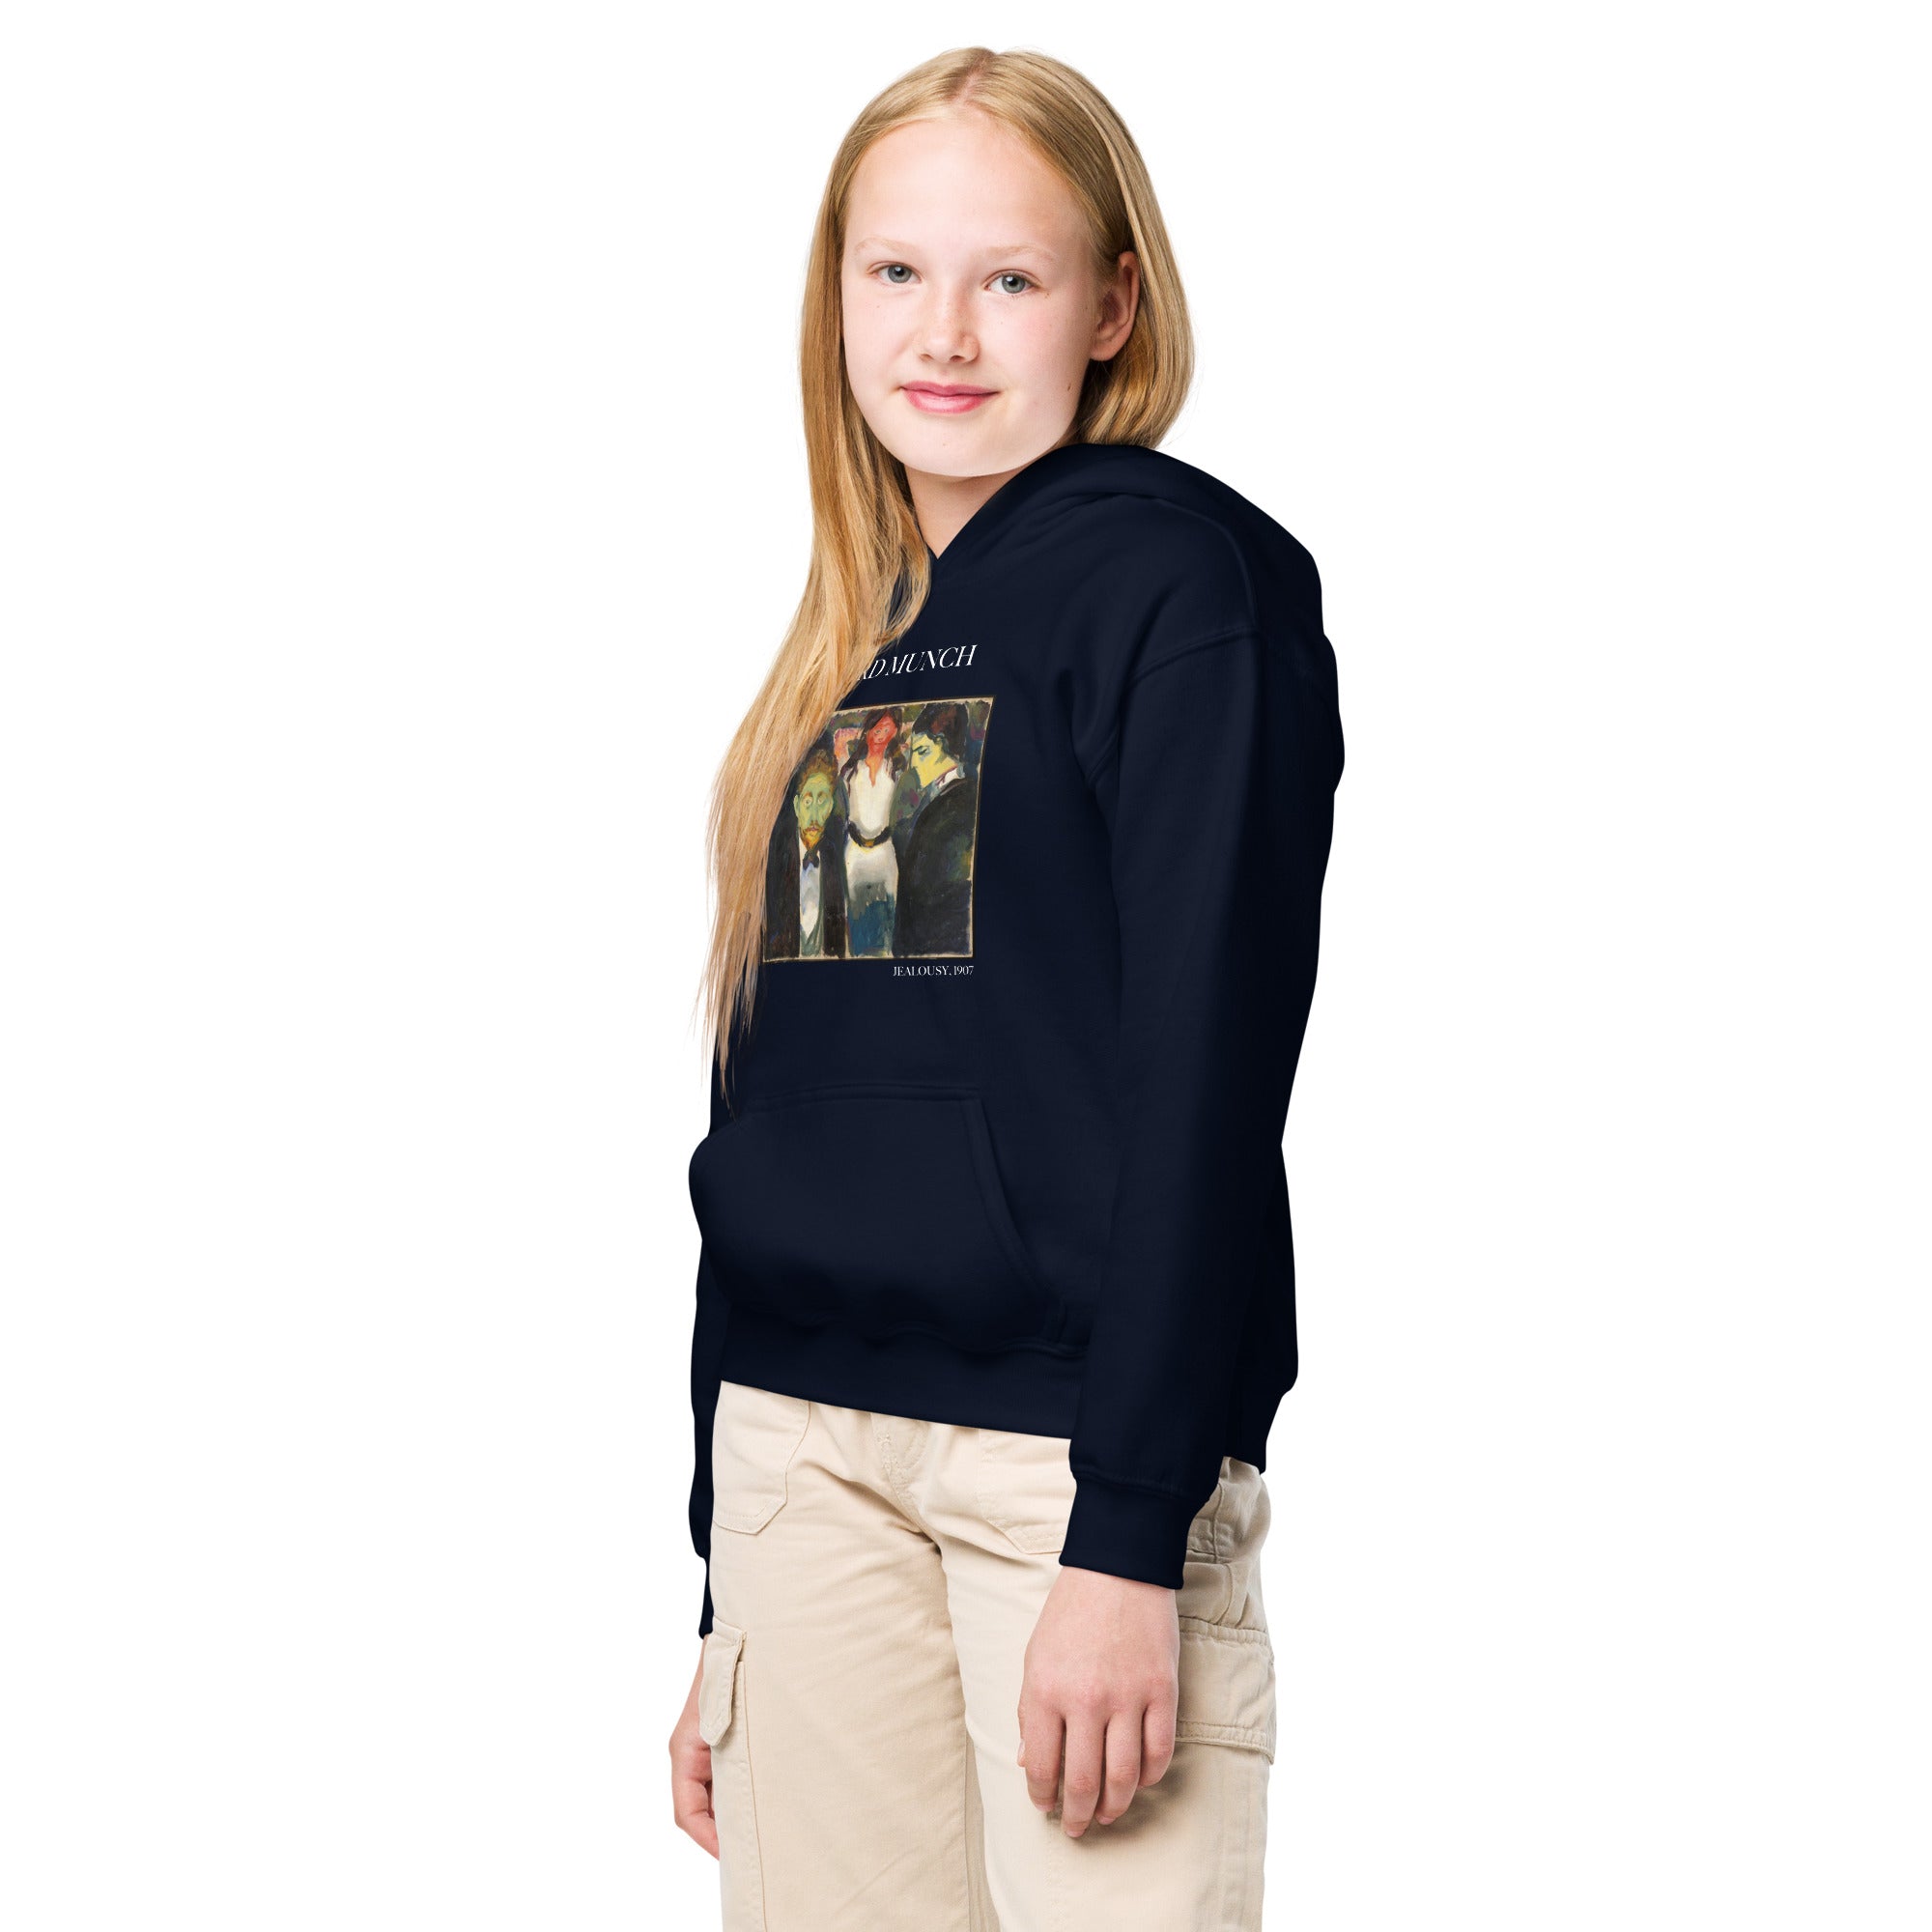 Edvard Munch 'Jealousy' Famous Painting Hoodie | Premium Youth Art Hoodie